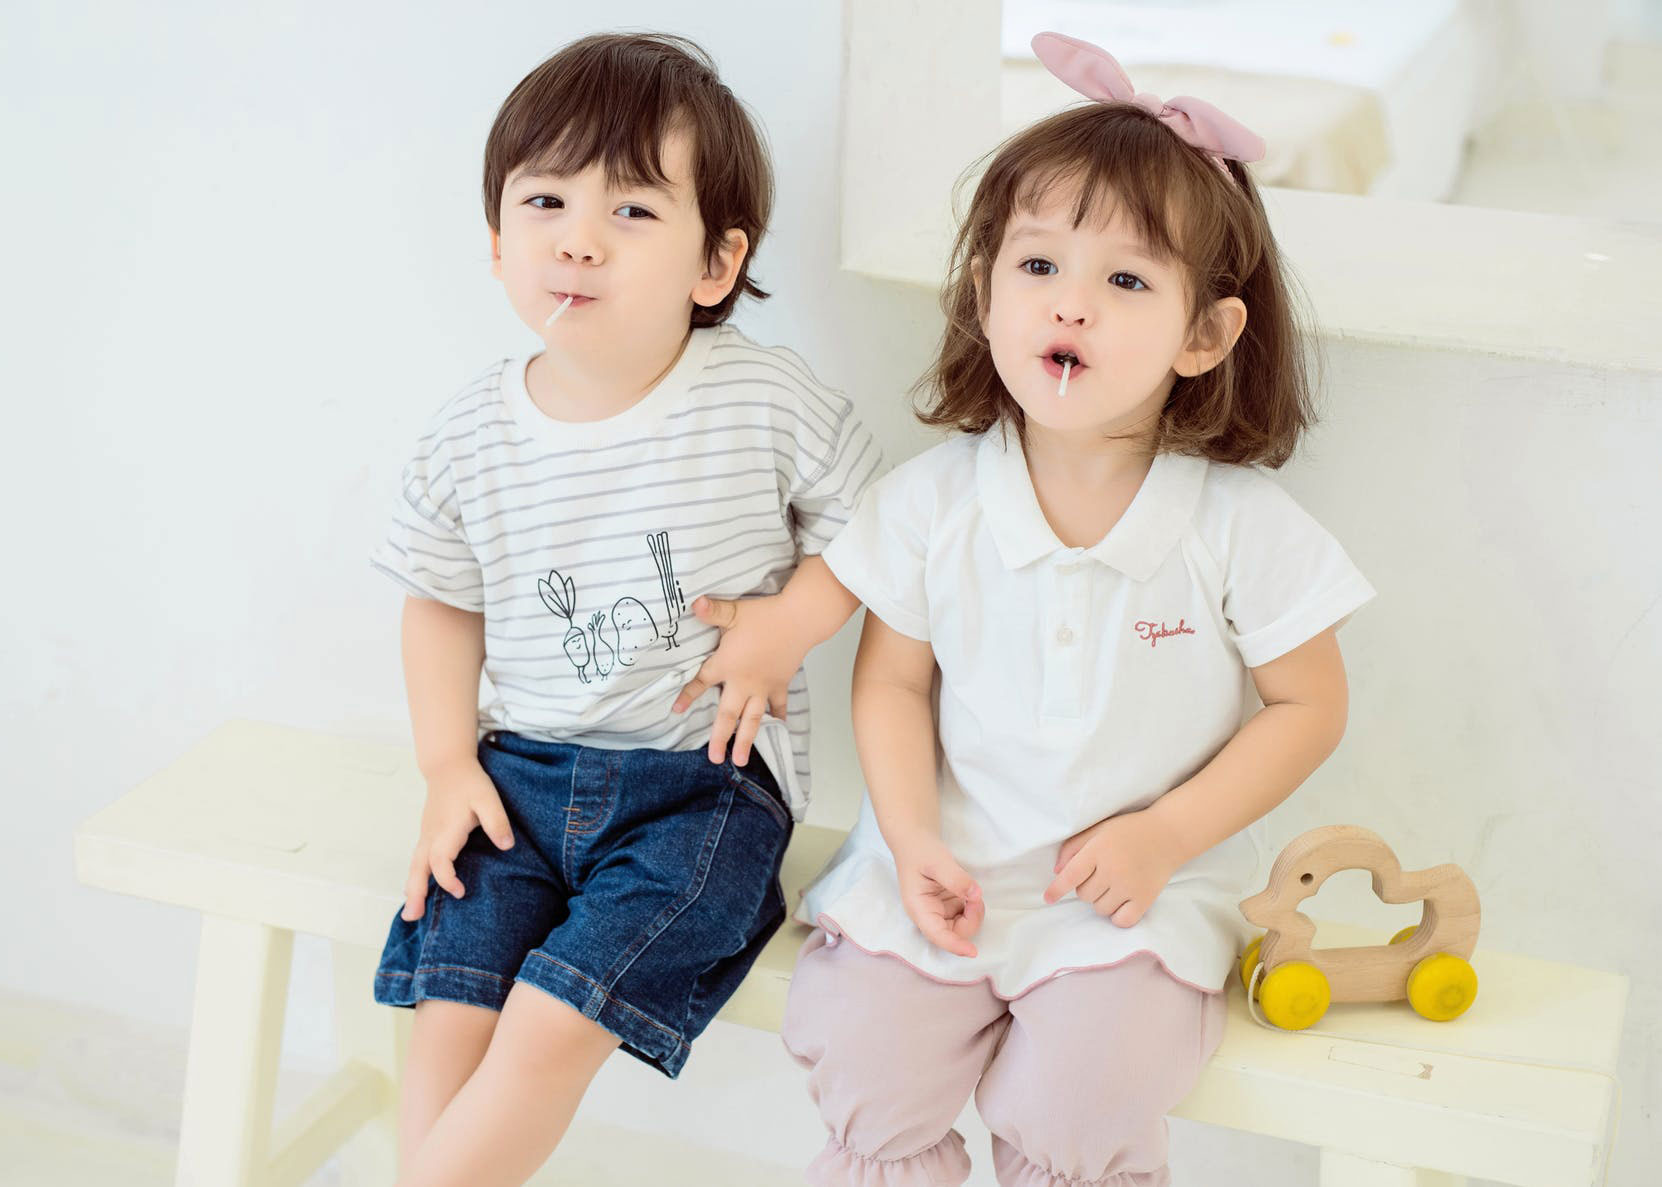 Young boy and girl with lolly pops in mouth sat down